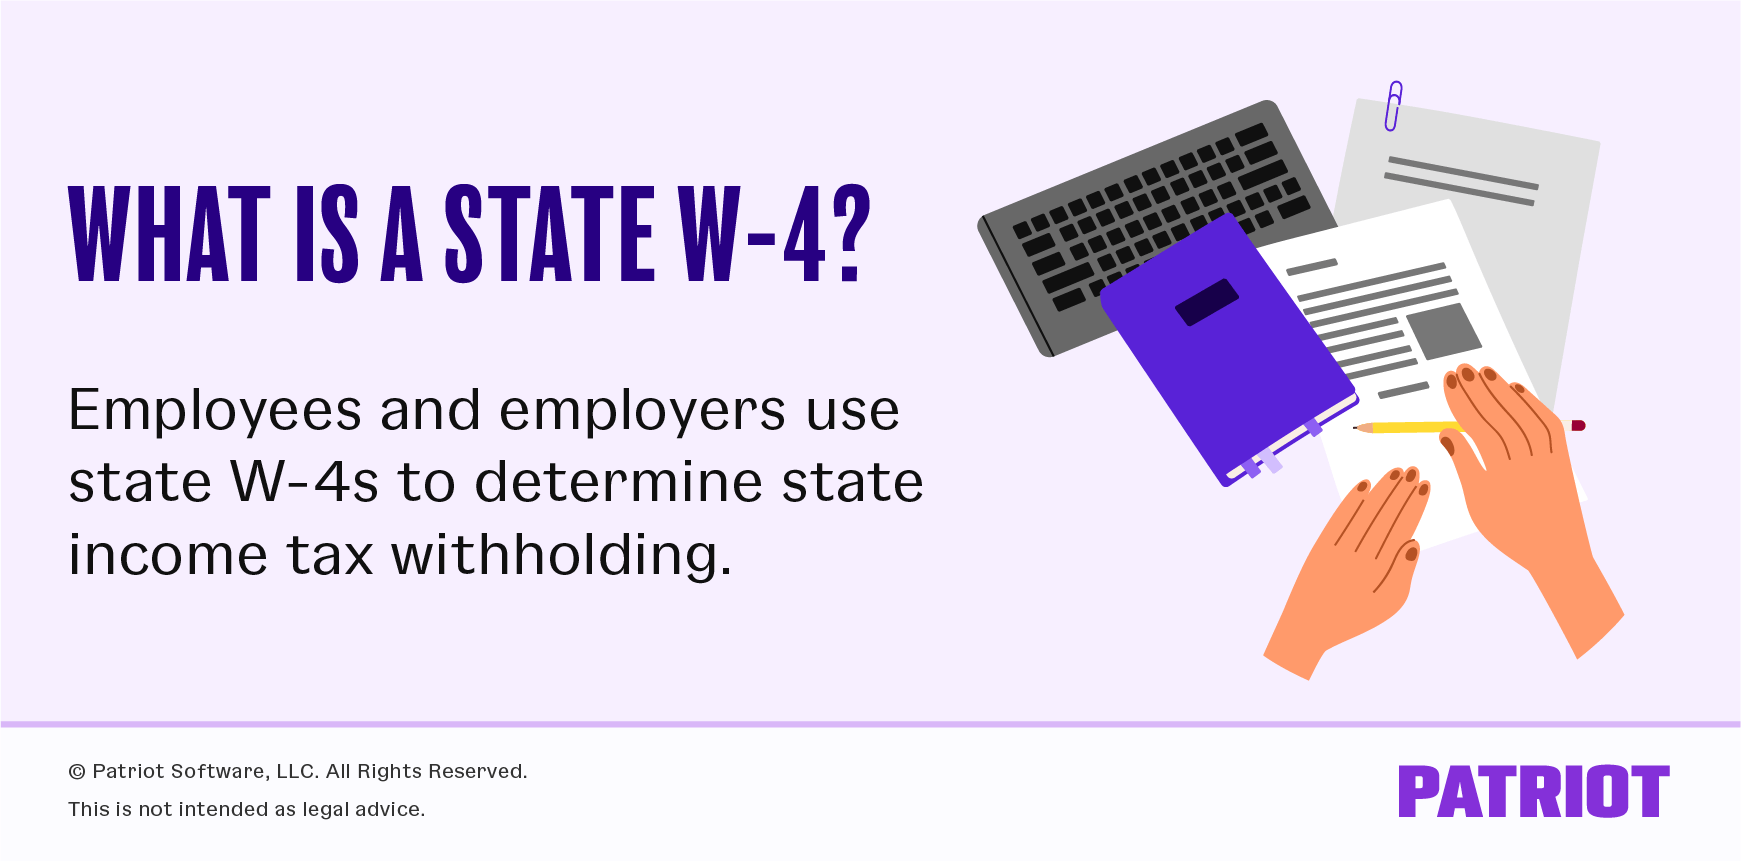 What is a state W-4? Employees and employers use state W-4s to determine state income tax withholding.